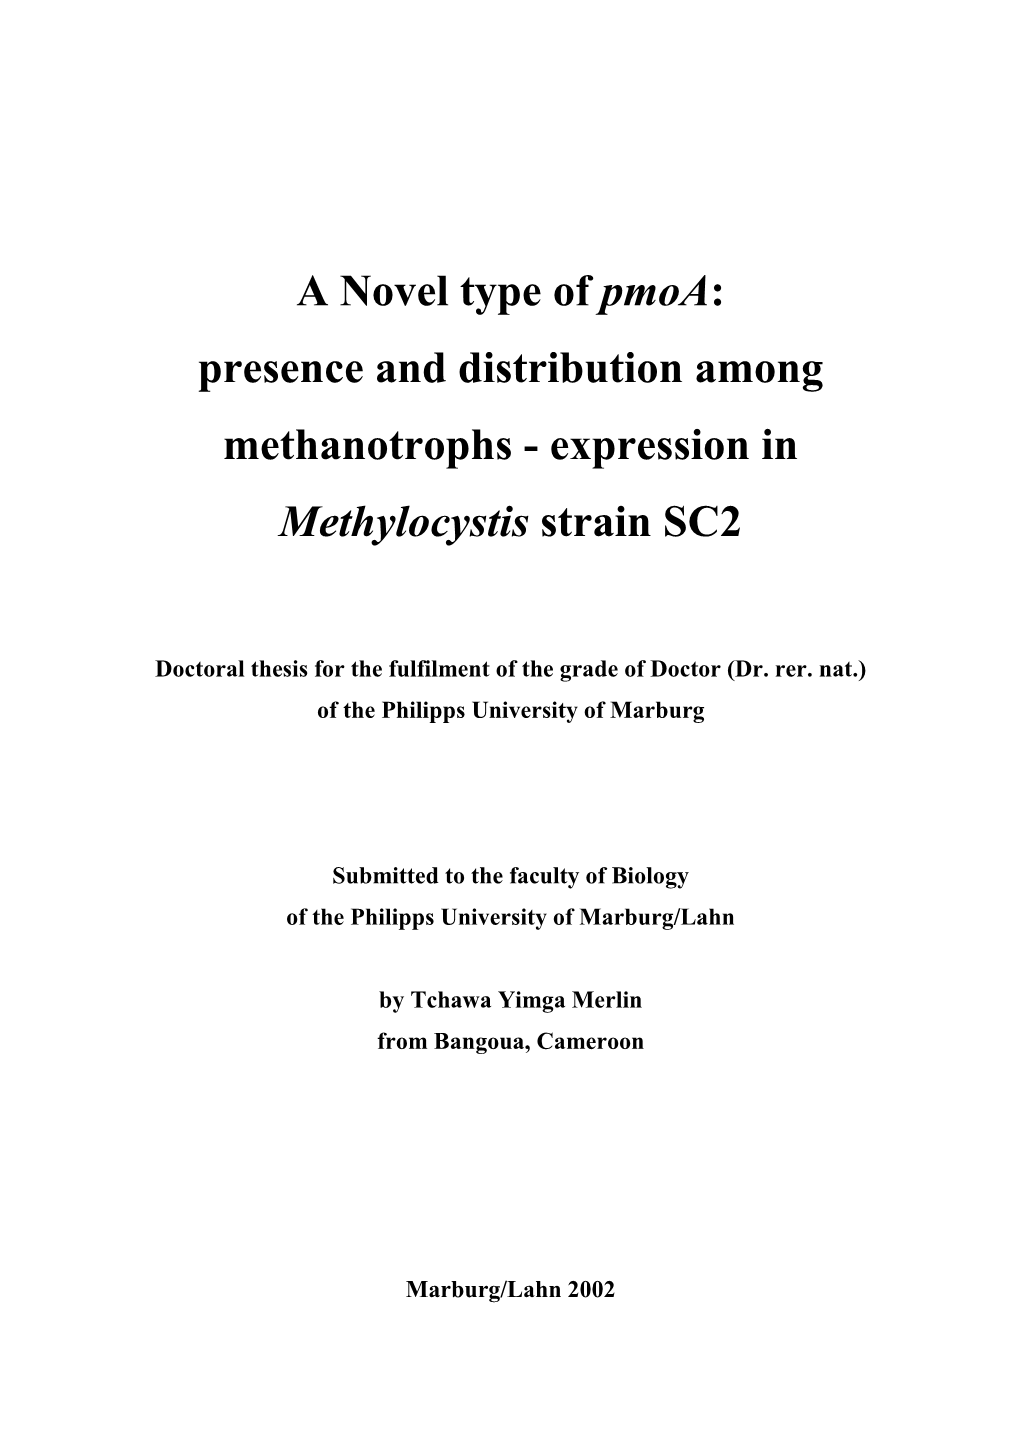 Expression in Methylocystis Strain SC2” Was Carried out Without Any Unlawful Devices